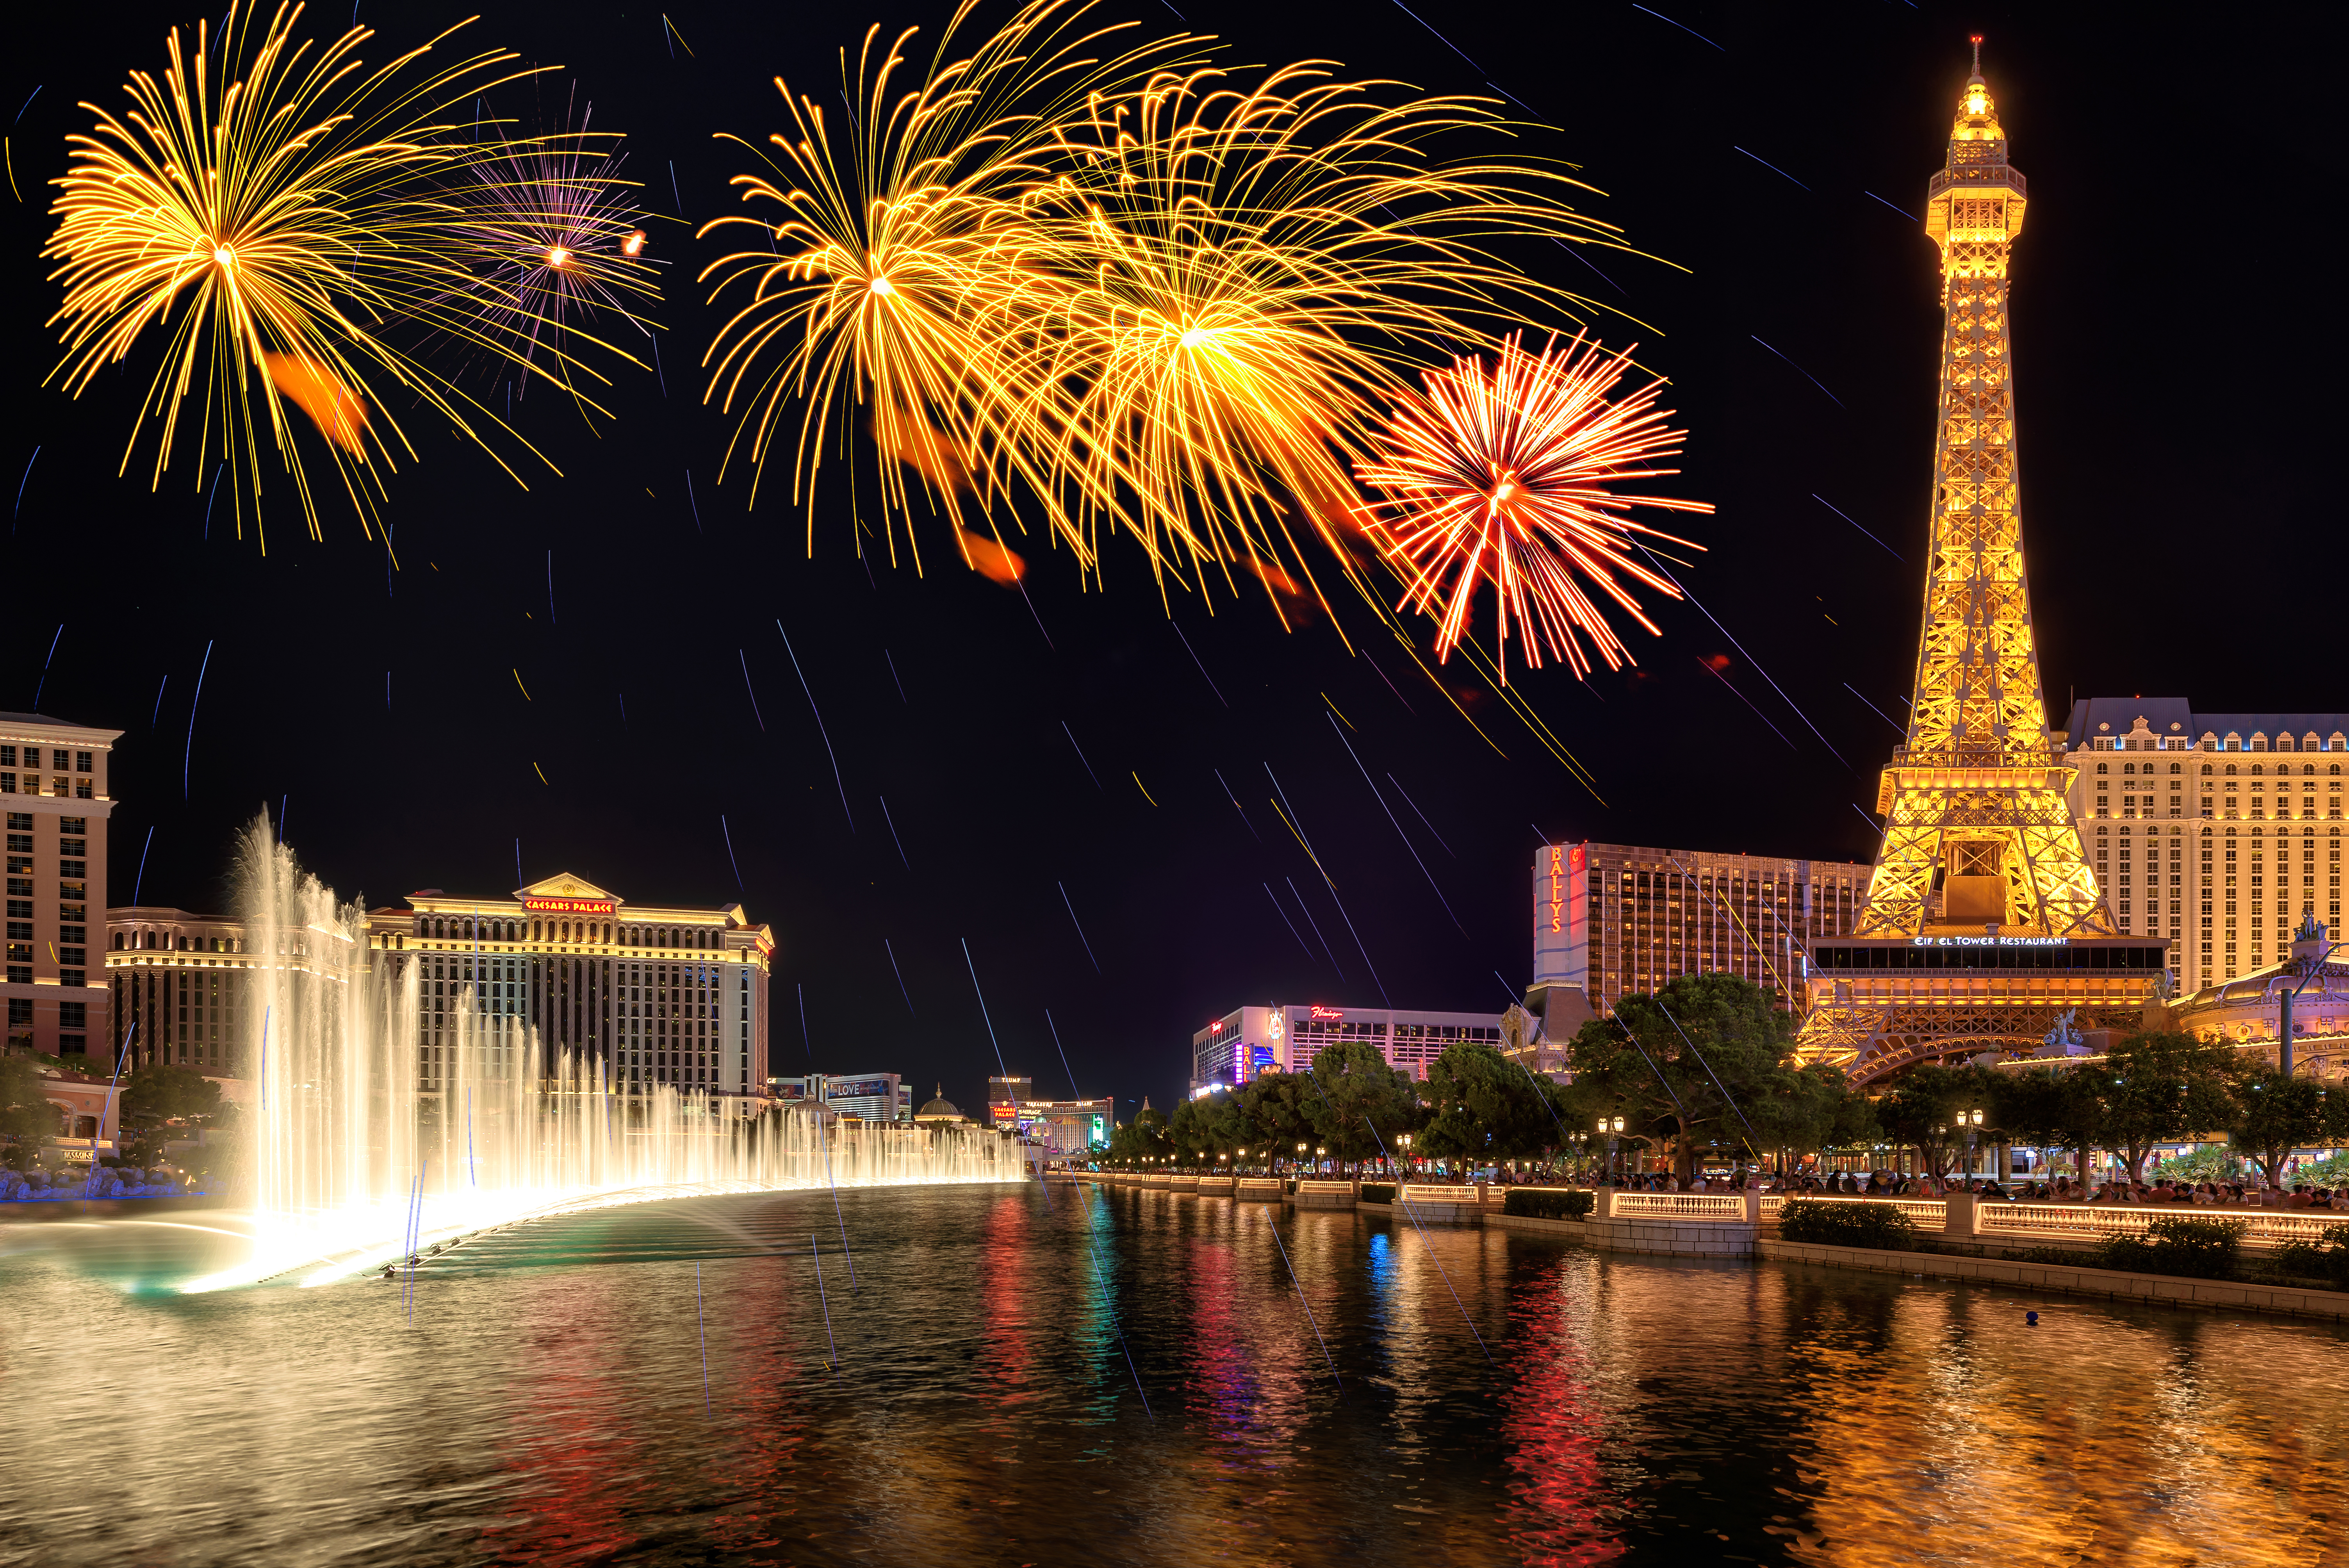 Fireworks and fountains show on Independence Day in Las Vegas